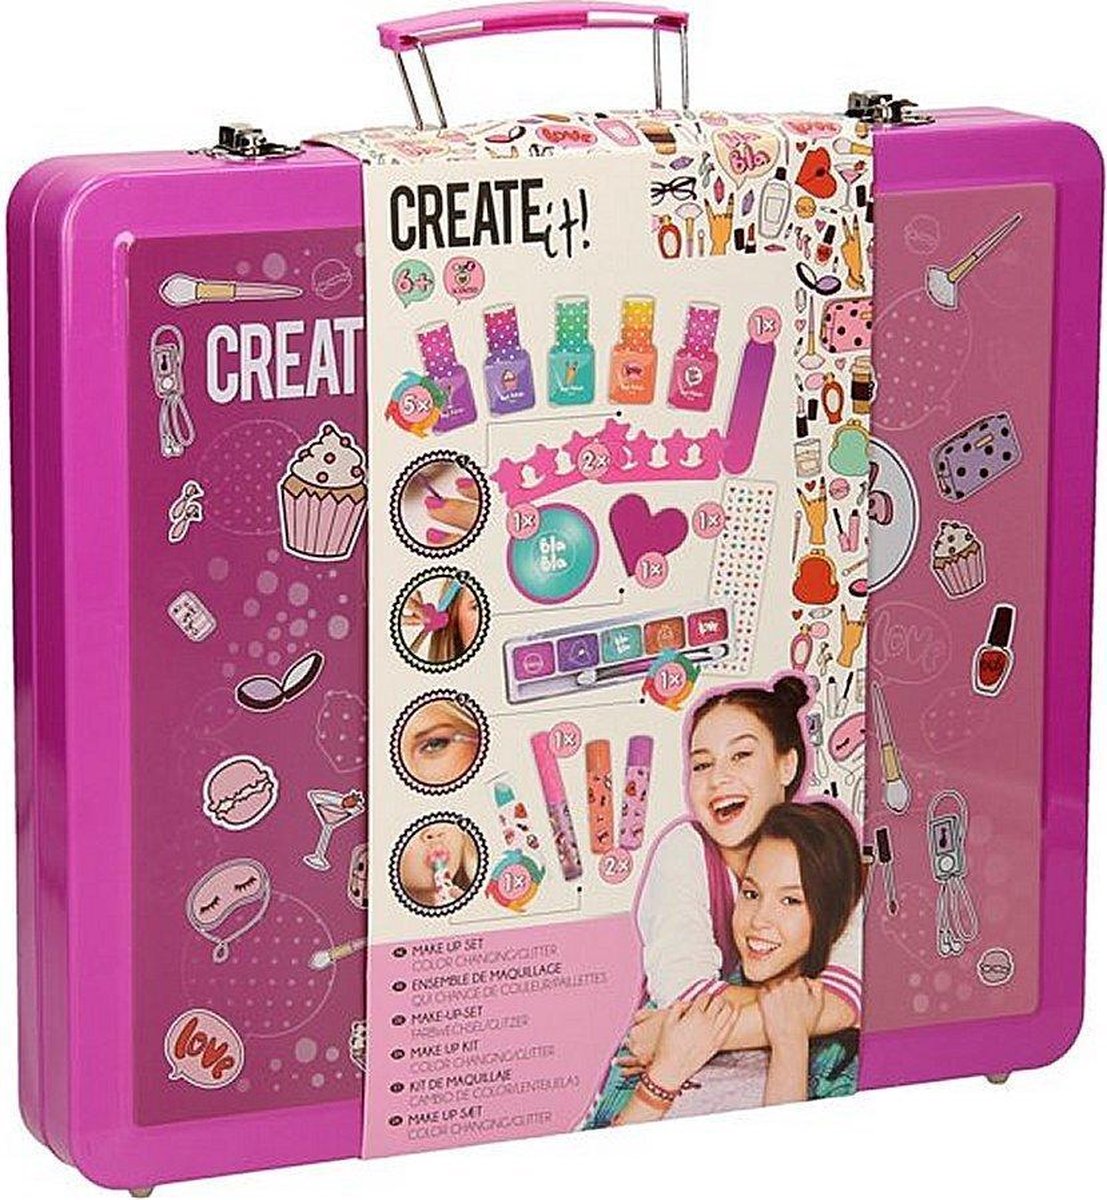 Top1Toys Create It! make up glitterkoffer junior 31 x 28 x 5 cm 16 delig - Roze